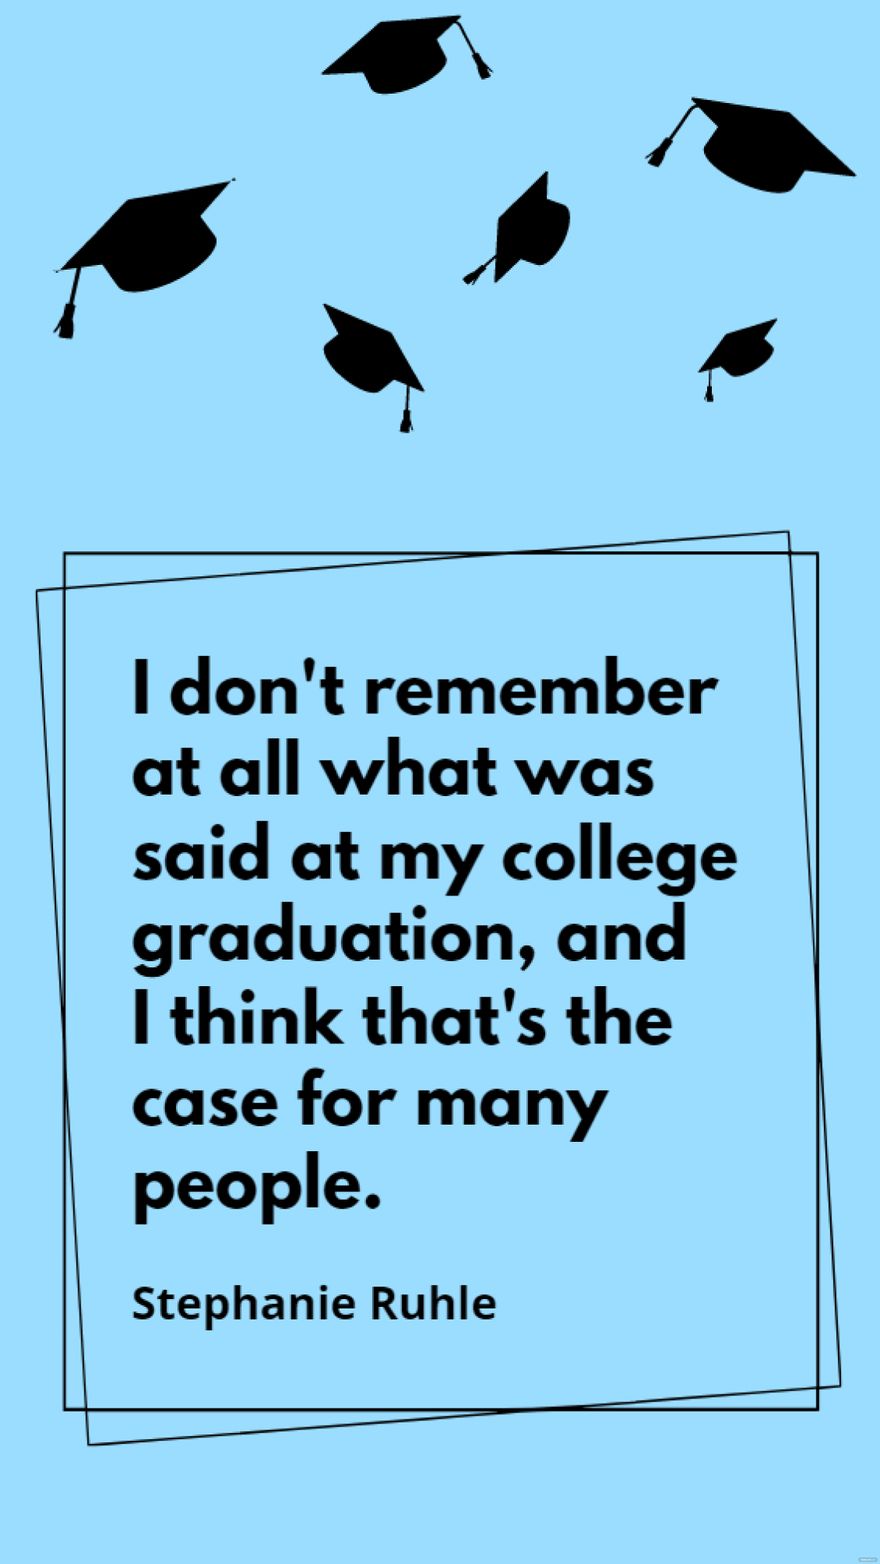 Free Stephanie Ruhle - I don't remember at all what was said at my college graduation, and I think that's the case for many people.